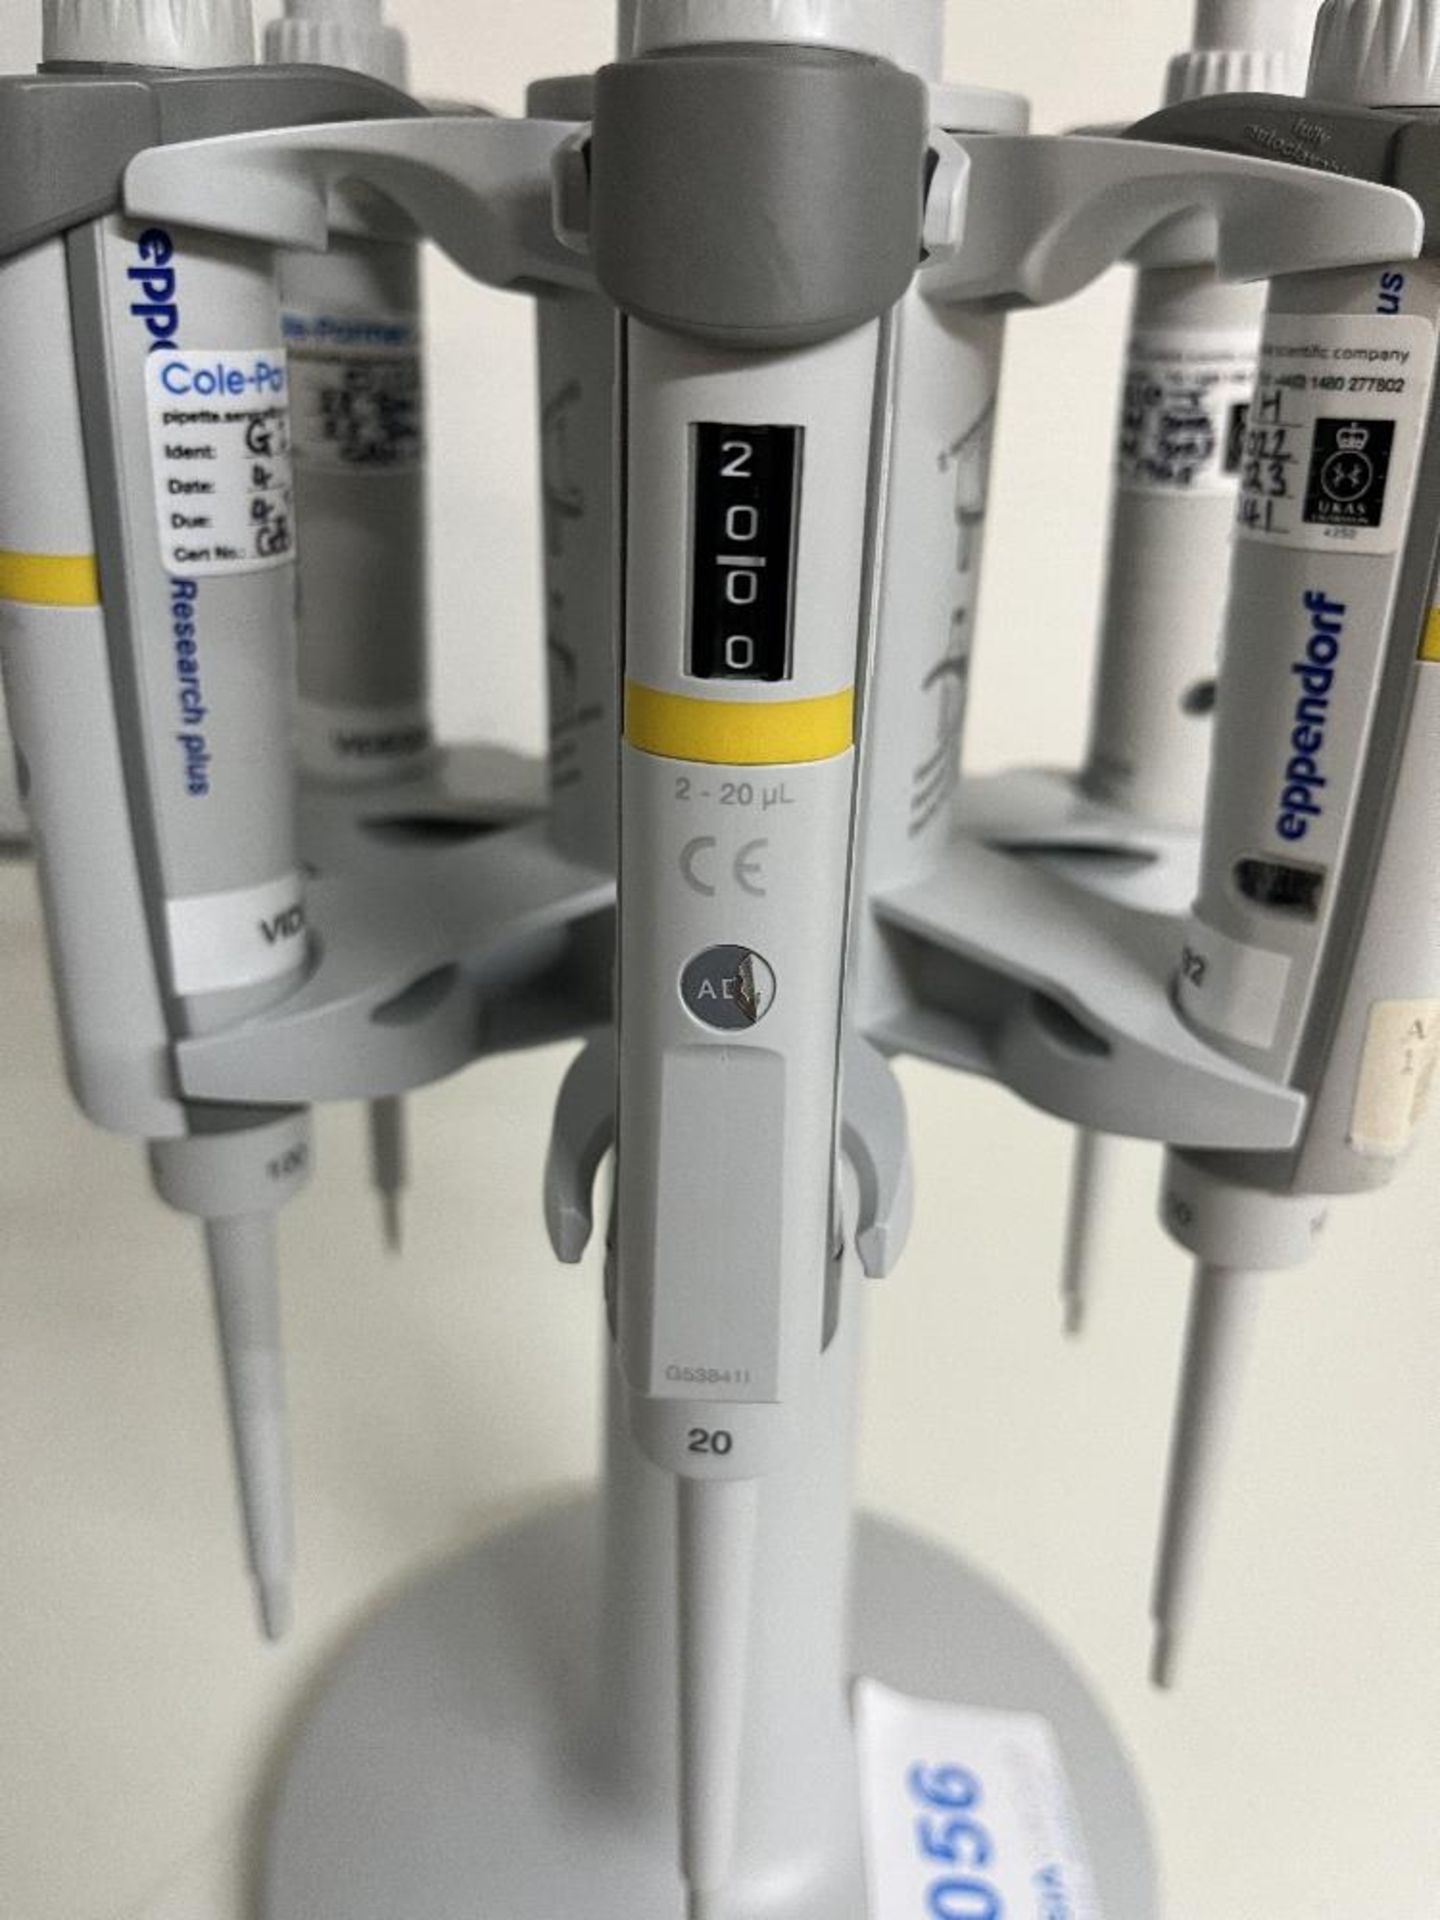 Eppendorf Pipette Carousel 2 with (6) Adjustable Volume Pipettes - Image 6 of 8